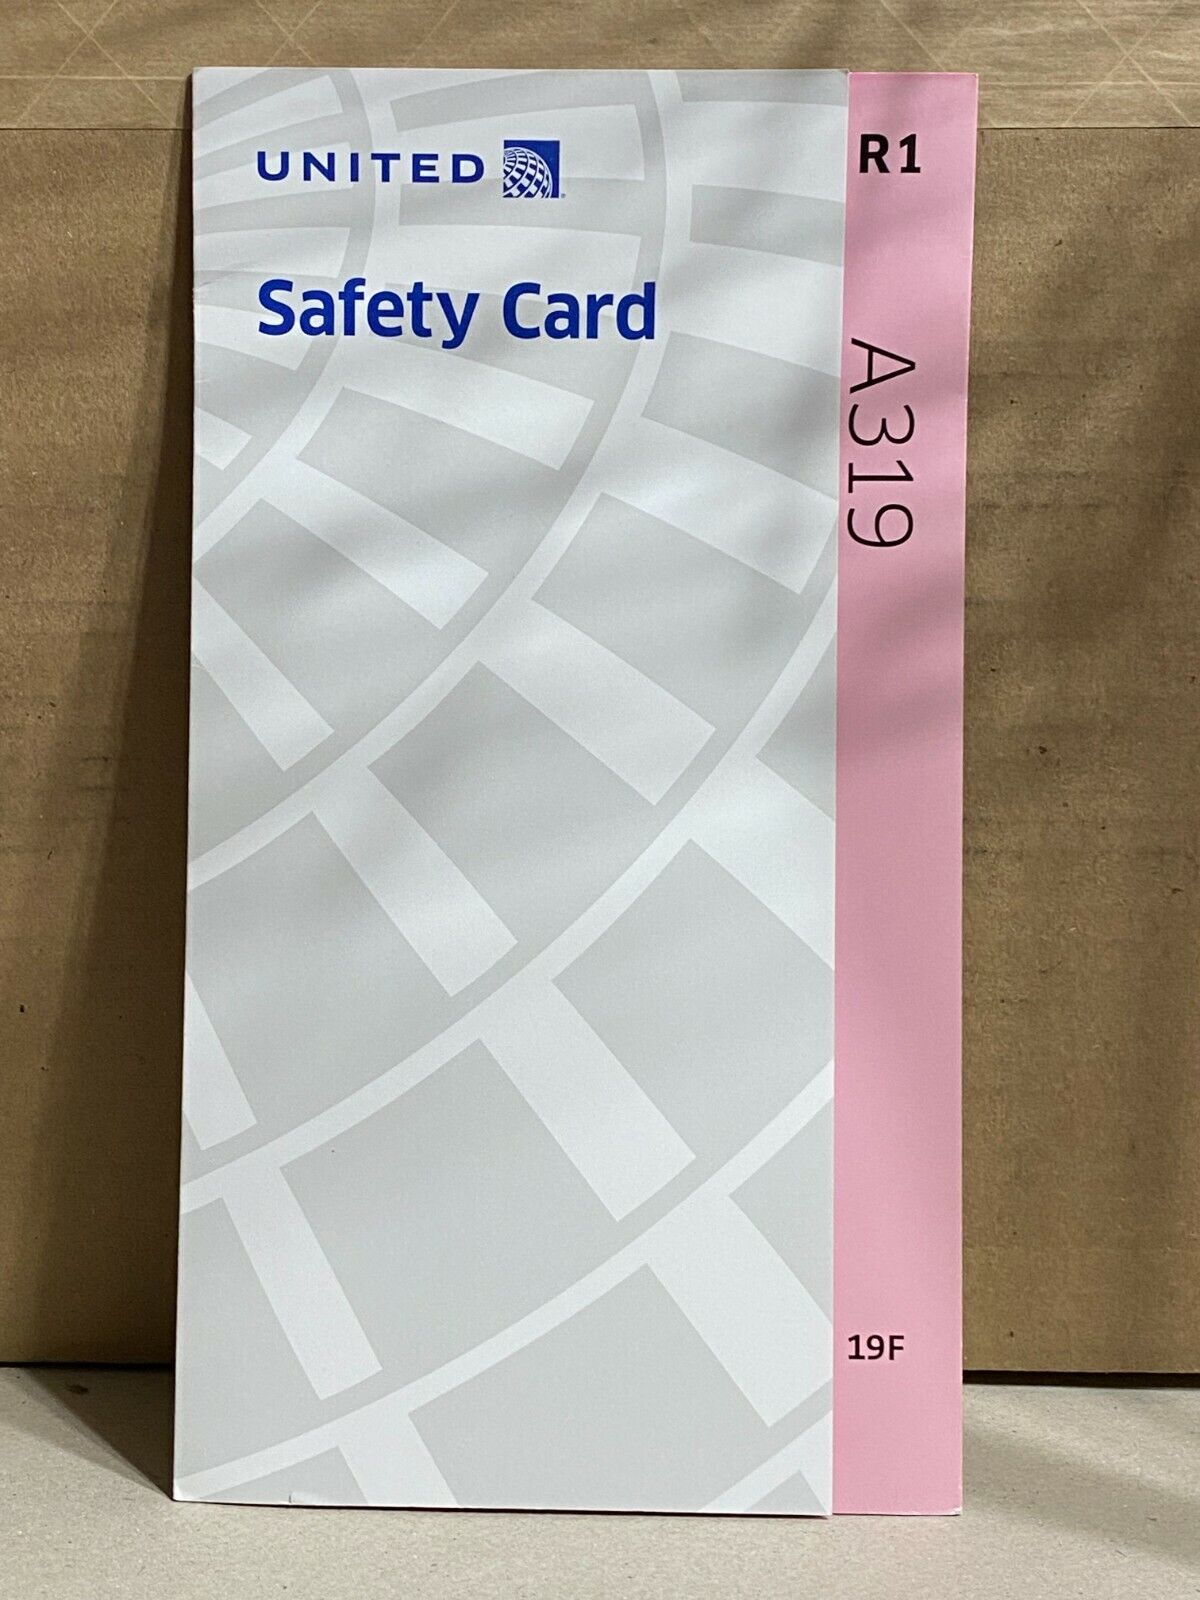 United Airlines Airbus A319 Aircraft Passenger Safety Card GOOD Pink R1